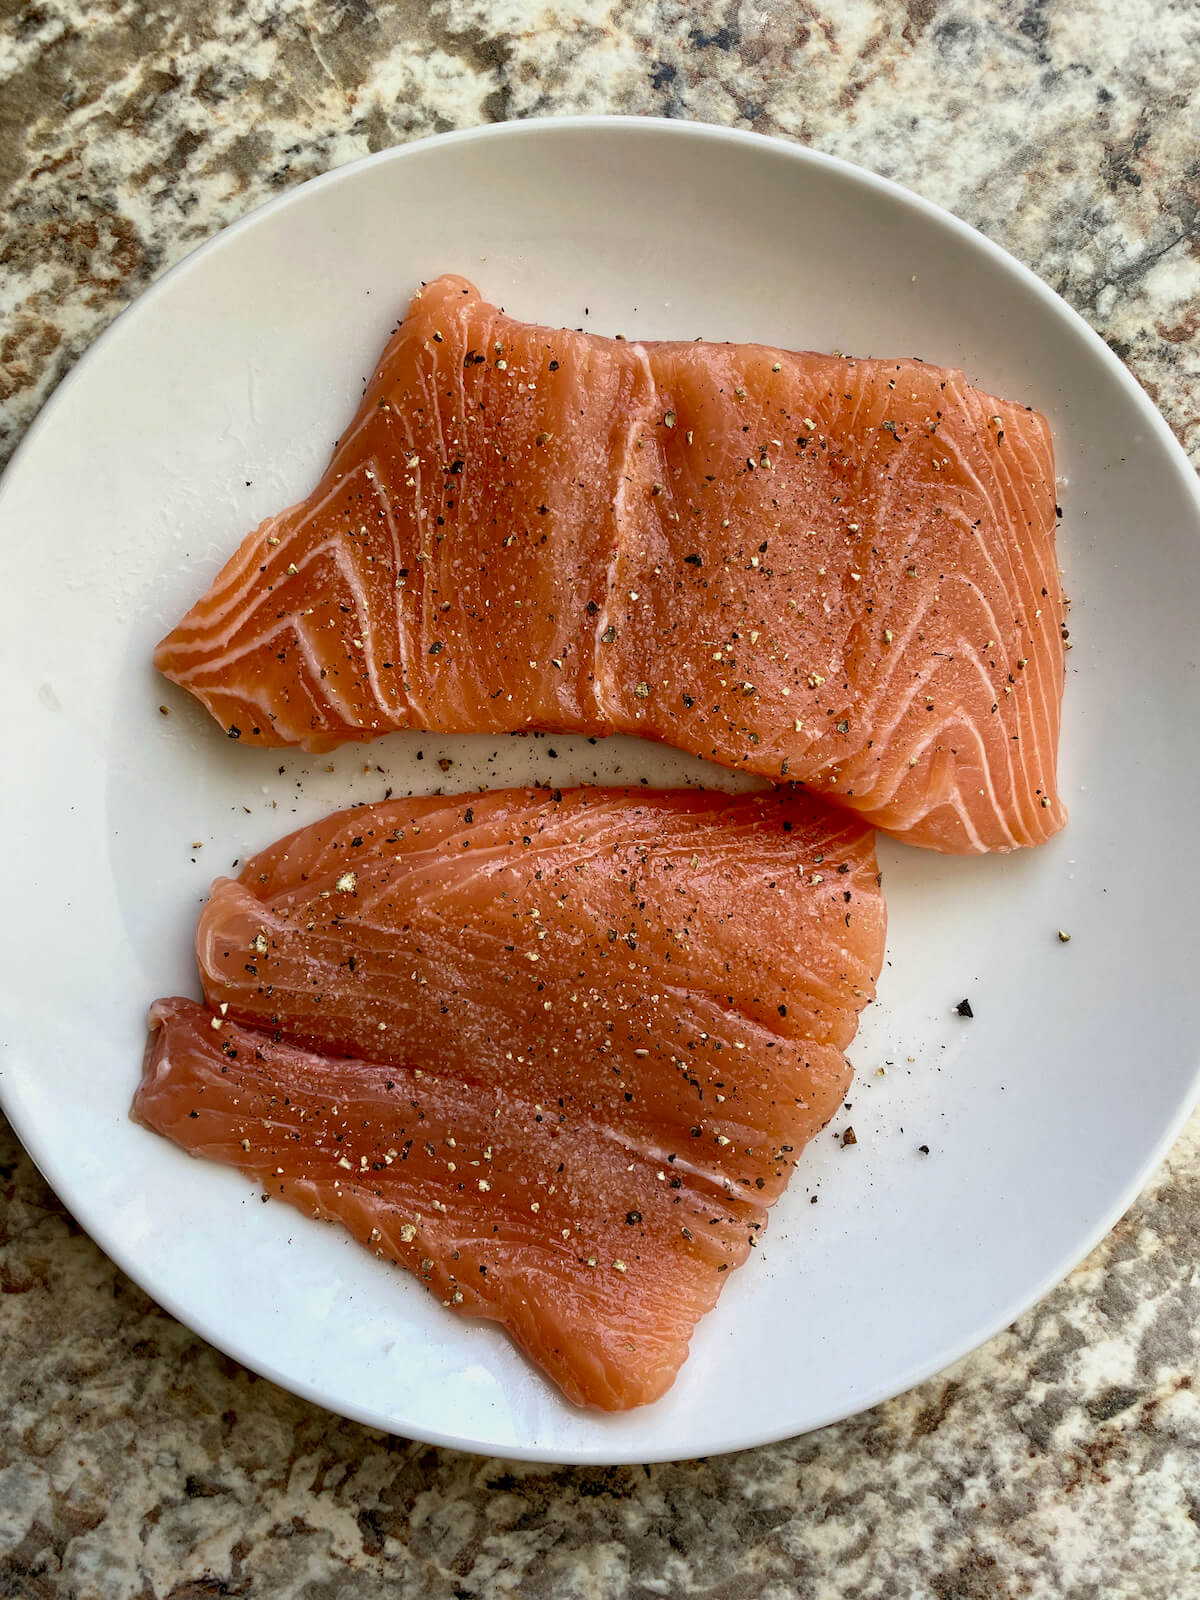 Two raw salmon fillets seasoned with salt and pepper on a white plate.